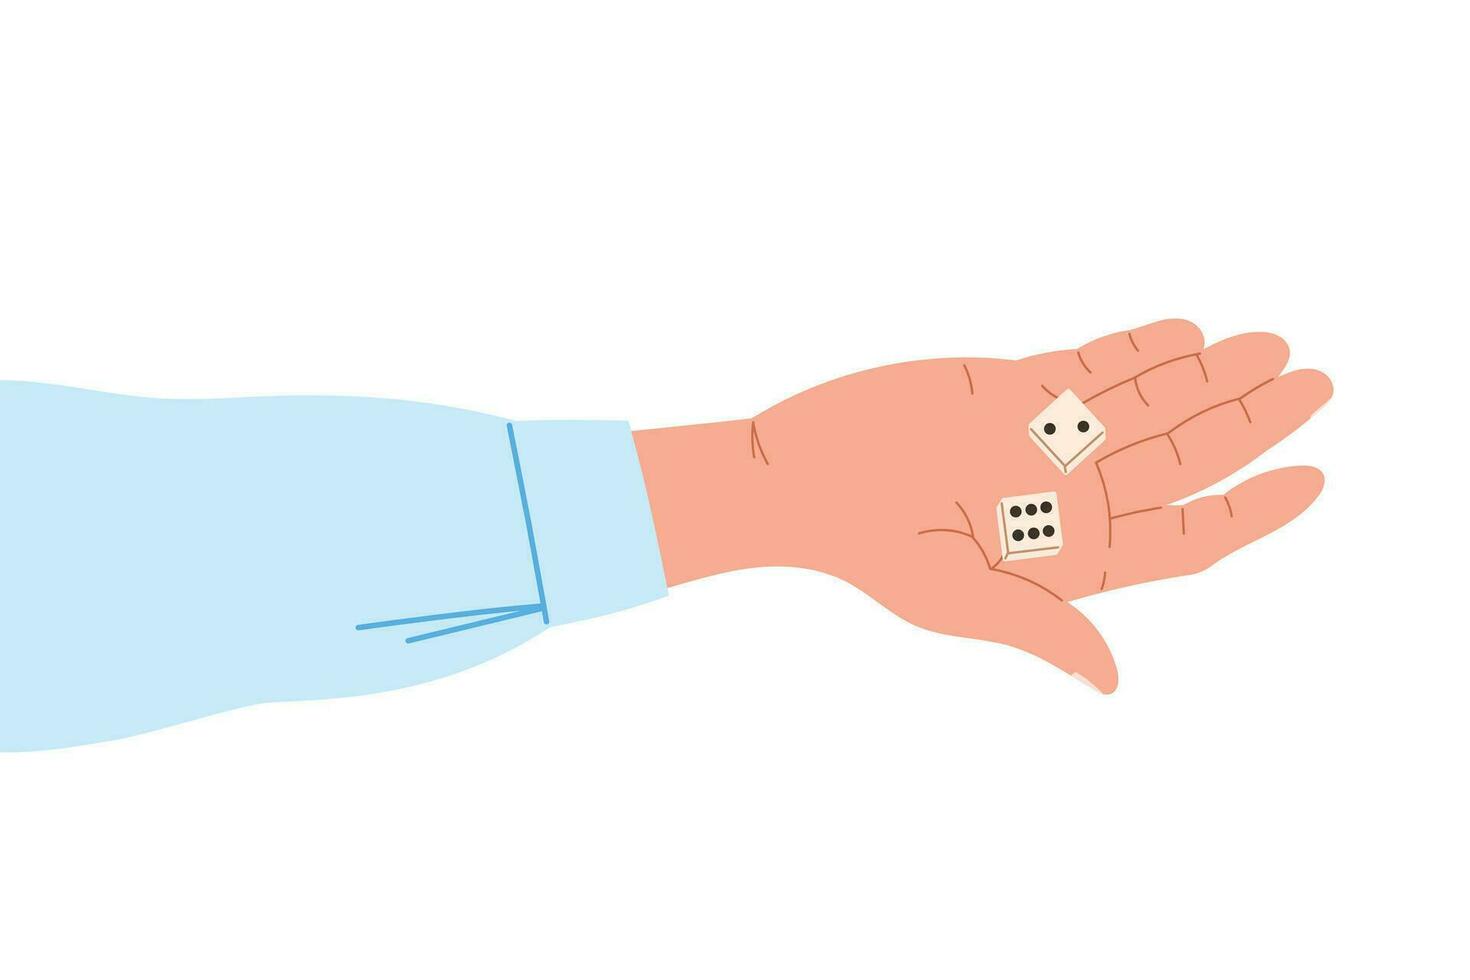 Male cartoon hand in a shirt holding playing dice on the palm, top view. Board games concept. Vector isolated flat illustration.